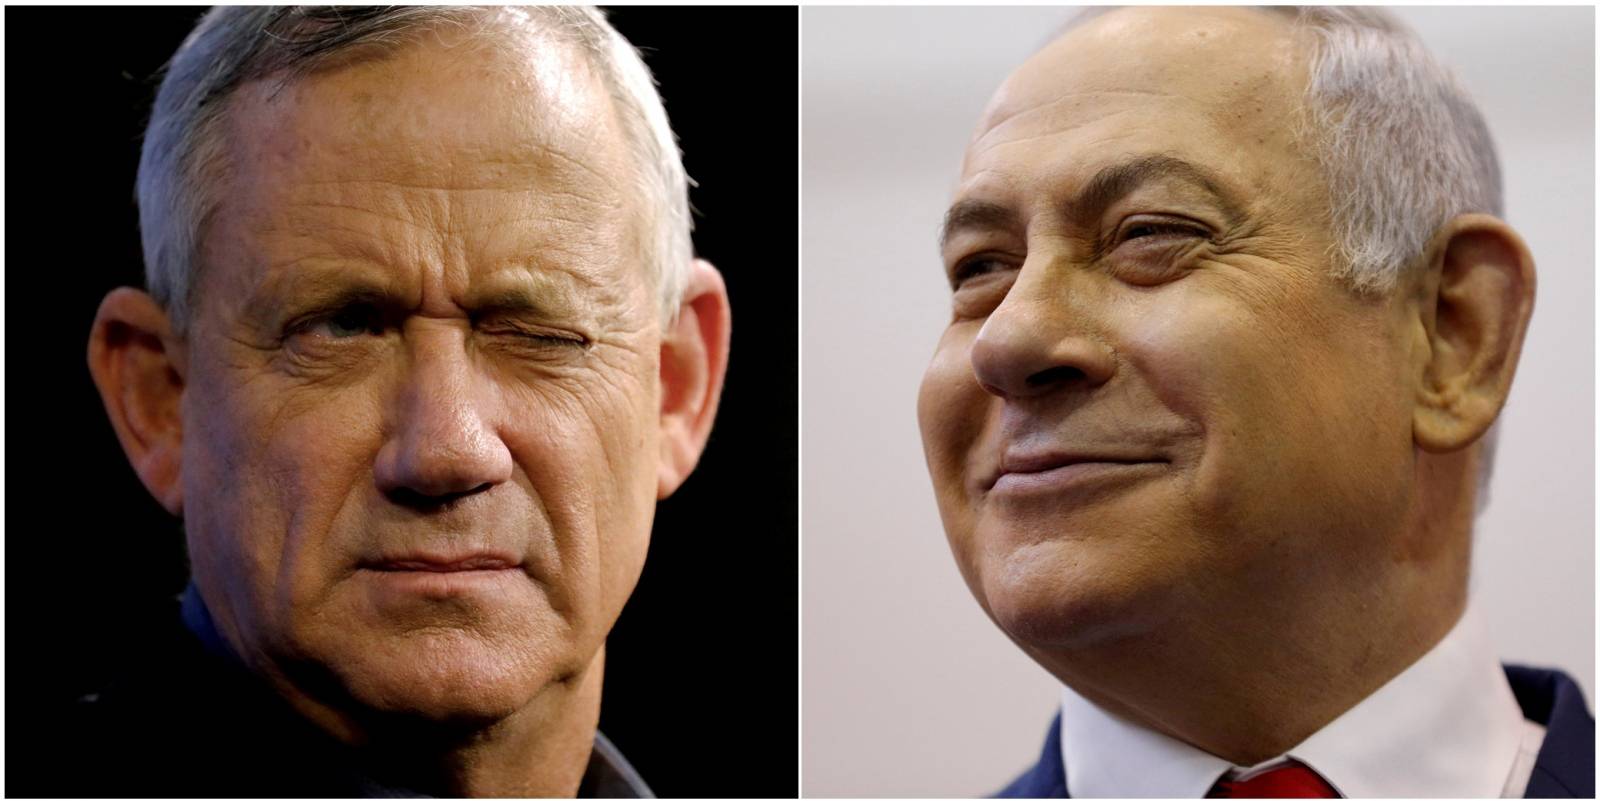 A combination picture shows Benny Gantz (left), leader of Blue and White party, at an election campaign event in Ashkelon, Israel, April 3, 2019, and Israeli Prime Minister Benjamin Netanyahu smiling at a polling station in Jerusalem